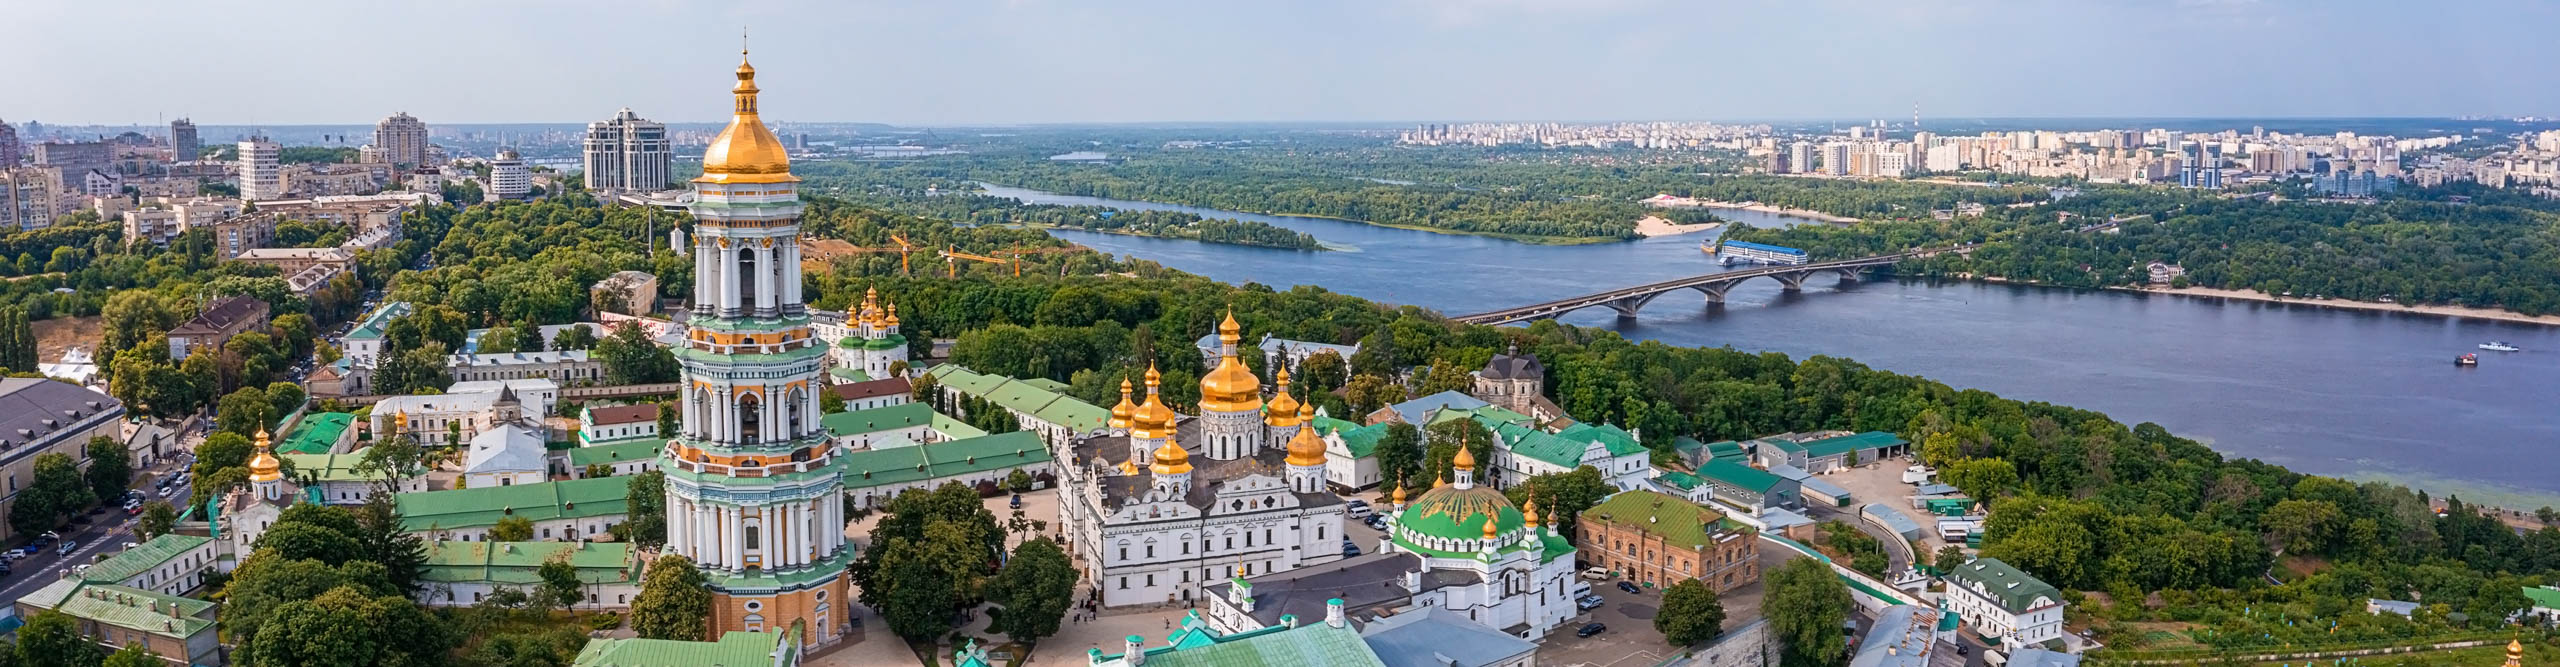 Aerial view of the Kiev Pechersk Lavra near the Motherland Monument, Kiev Monastery of the Caves